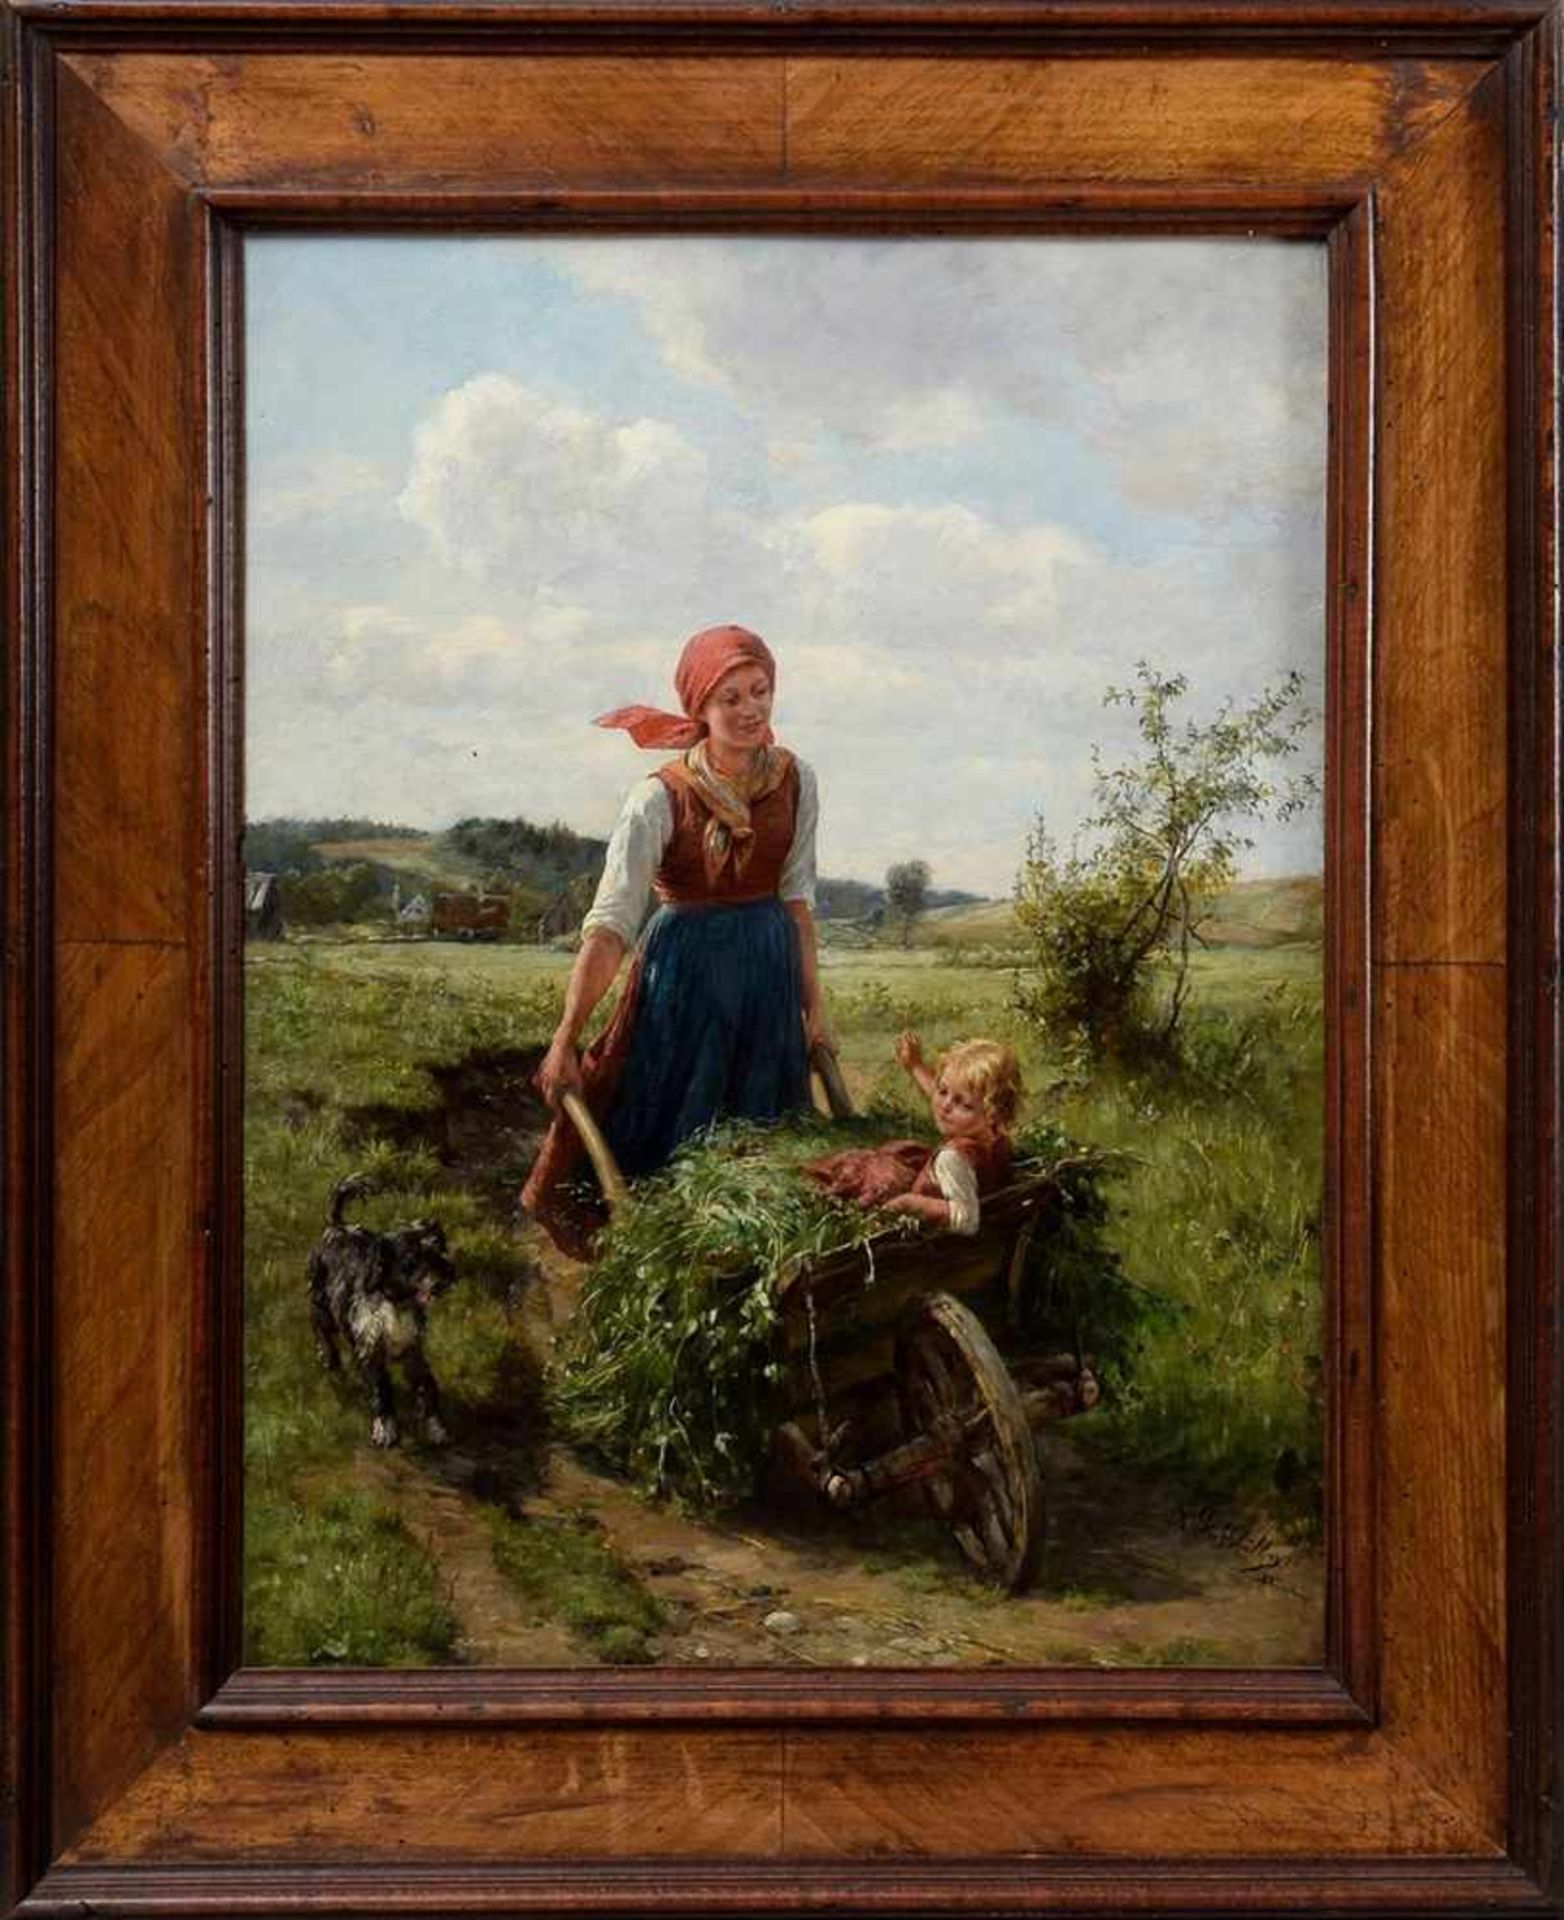 Stuhlmüller, Karl (1859-1930) "Young peasant woman with child on wheelbarrow", oil/wood, signed - Image 2 of 9